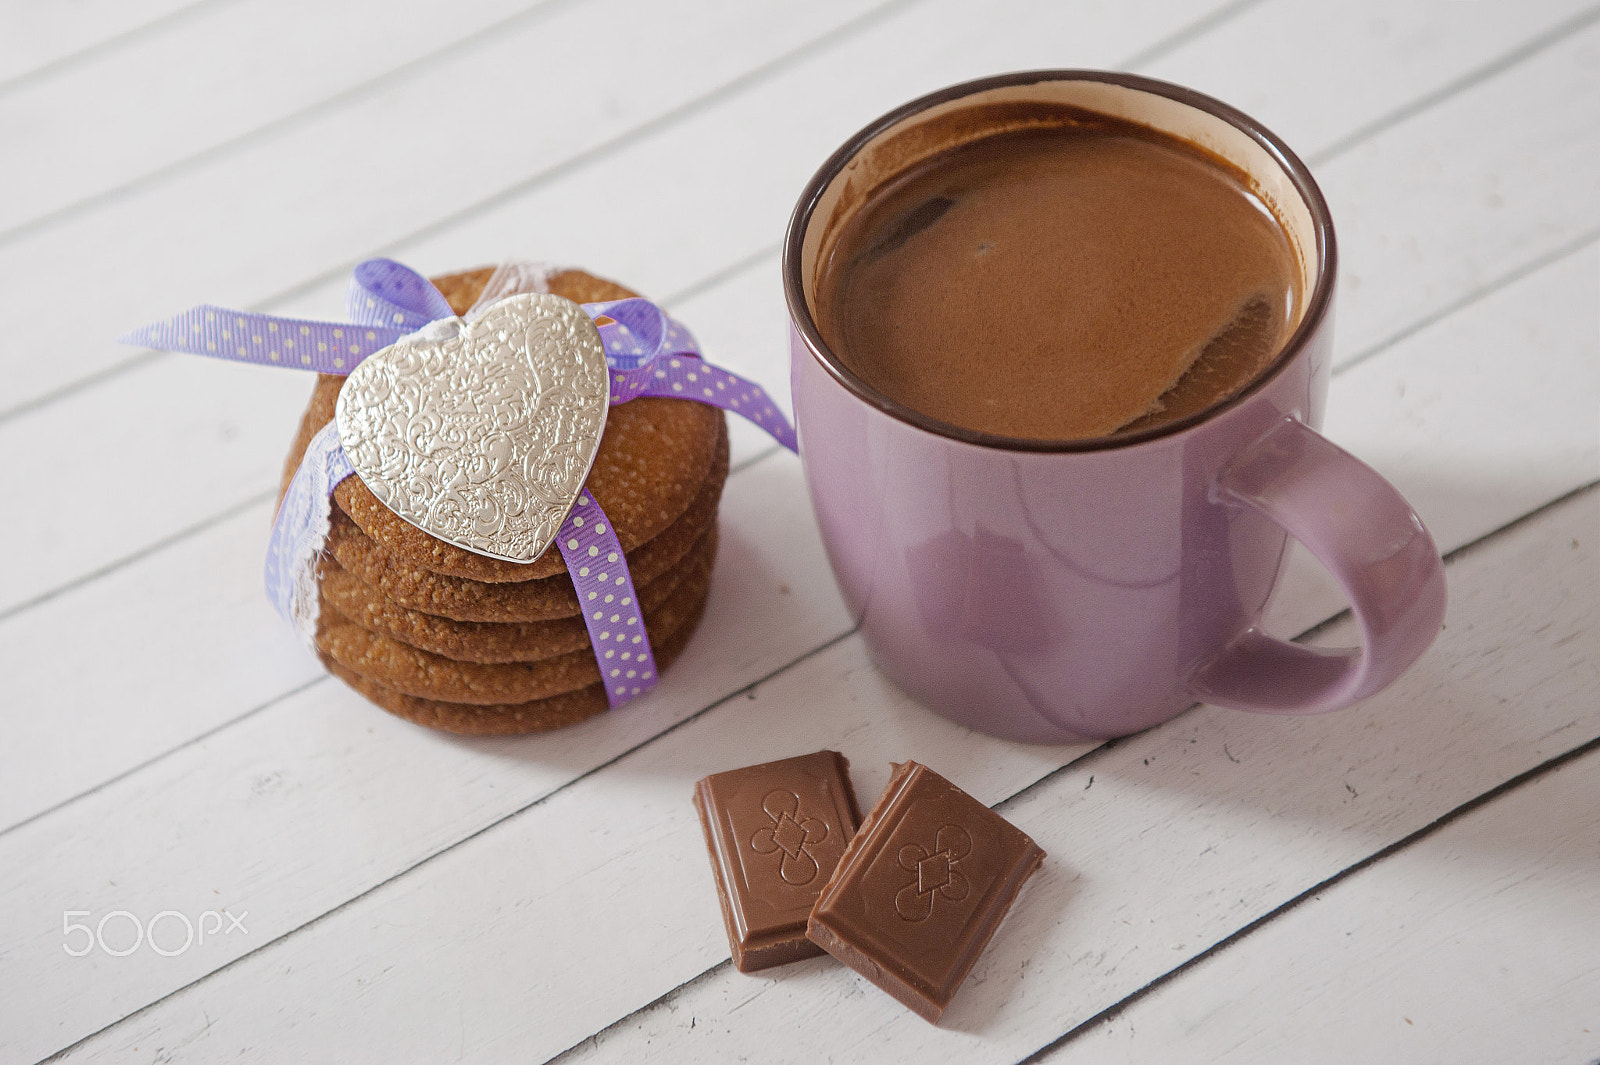 Nikon D700 sample photo. Gingerbread cookies, cup of cocoa, milk chocolate and metallic hearts. valentines day celebration photography